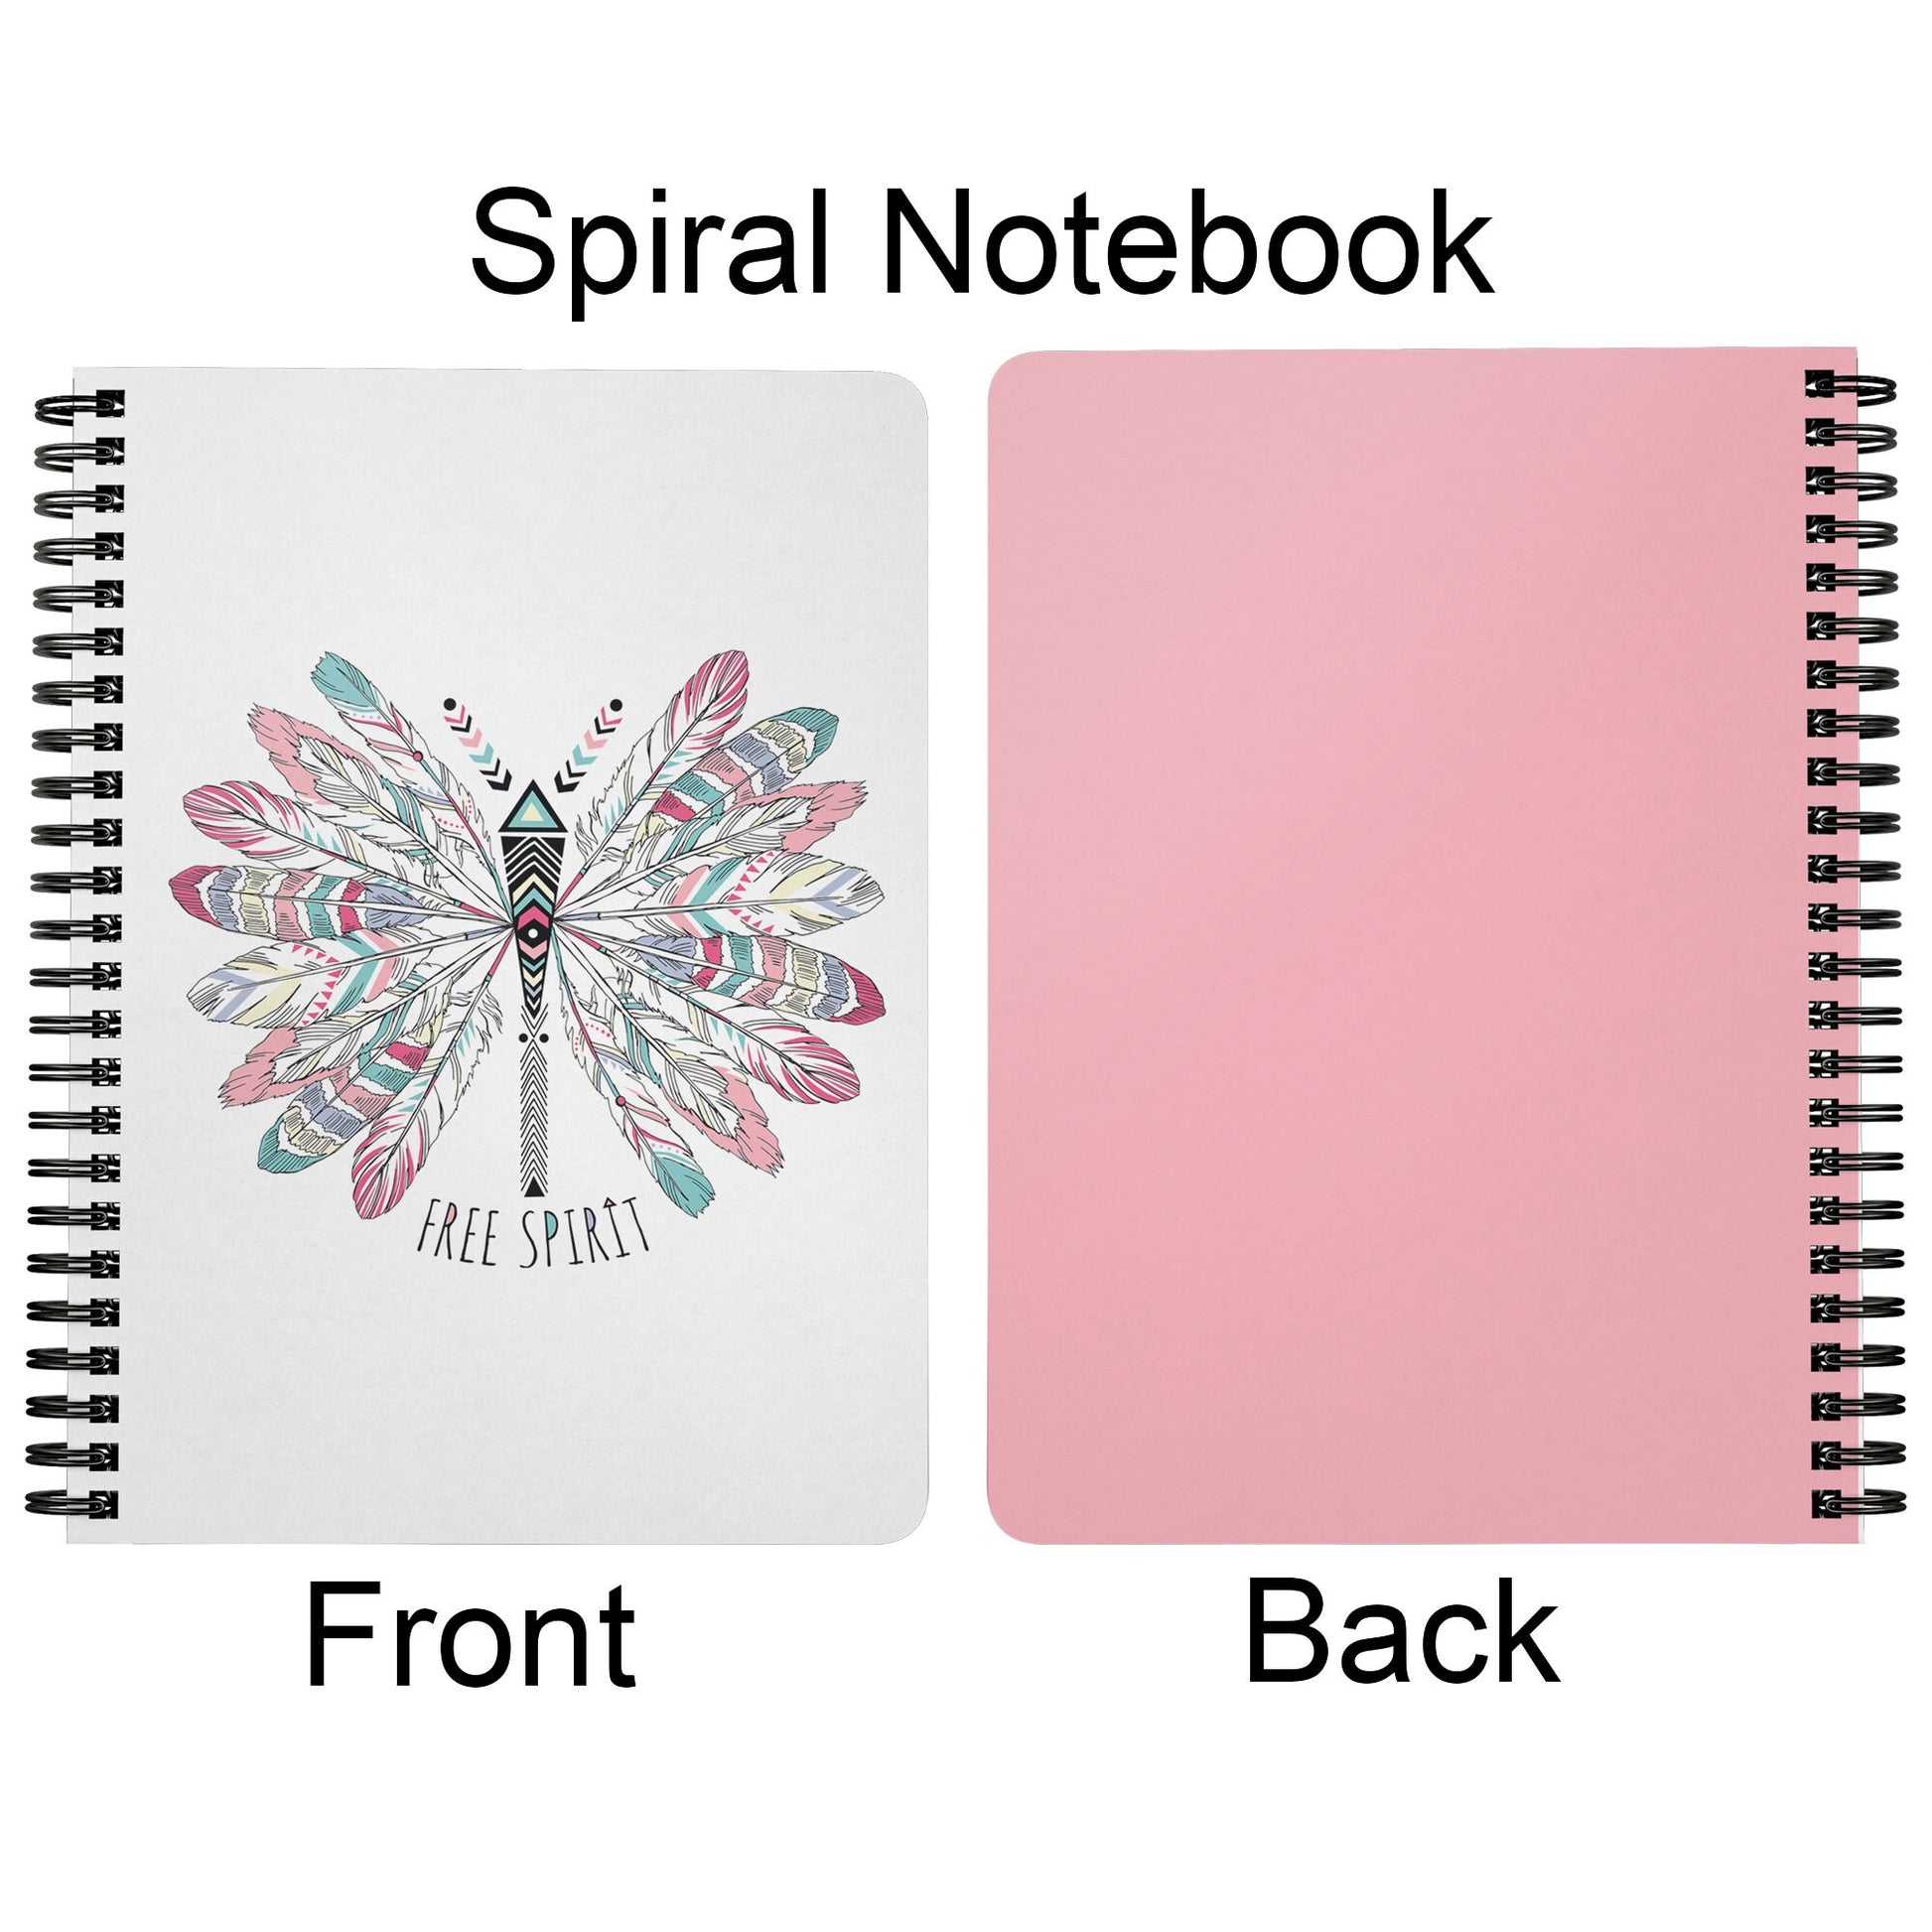 Free Spirit Dragonfly Spiral Notebook boho diary butterfly Notepad Gift dragonfly hippy notebooks Cheap Gifts Cute hippy journal dragonflies